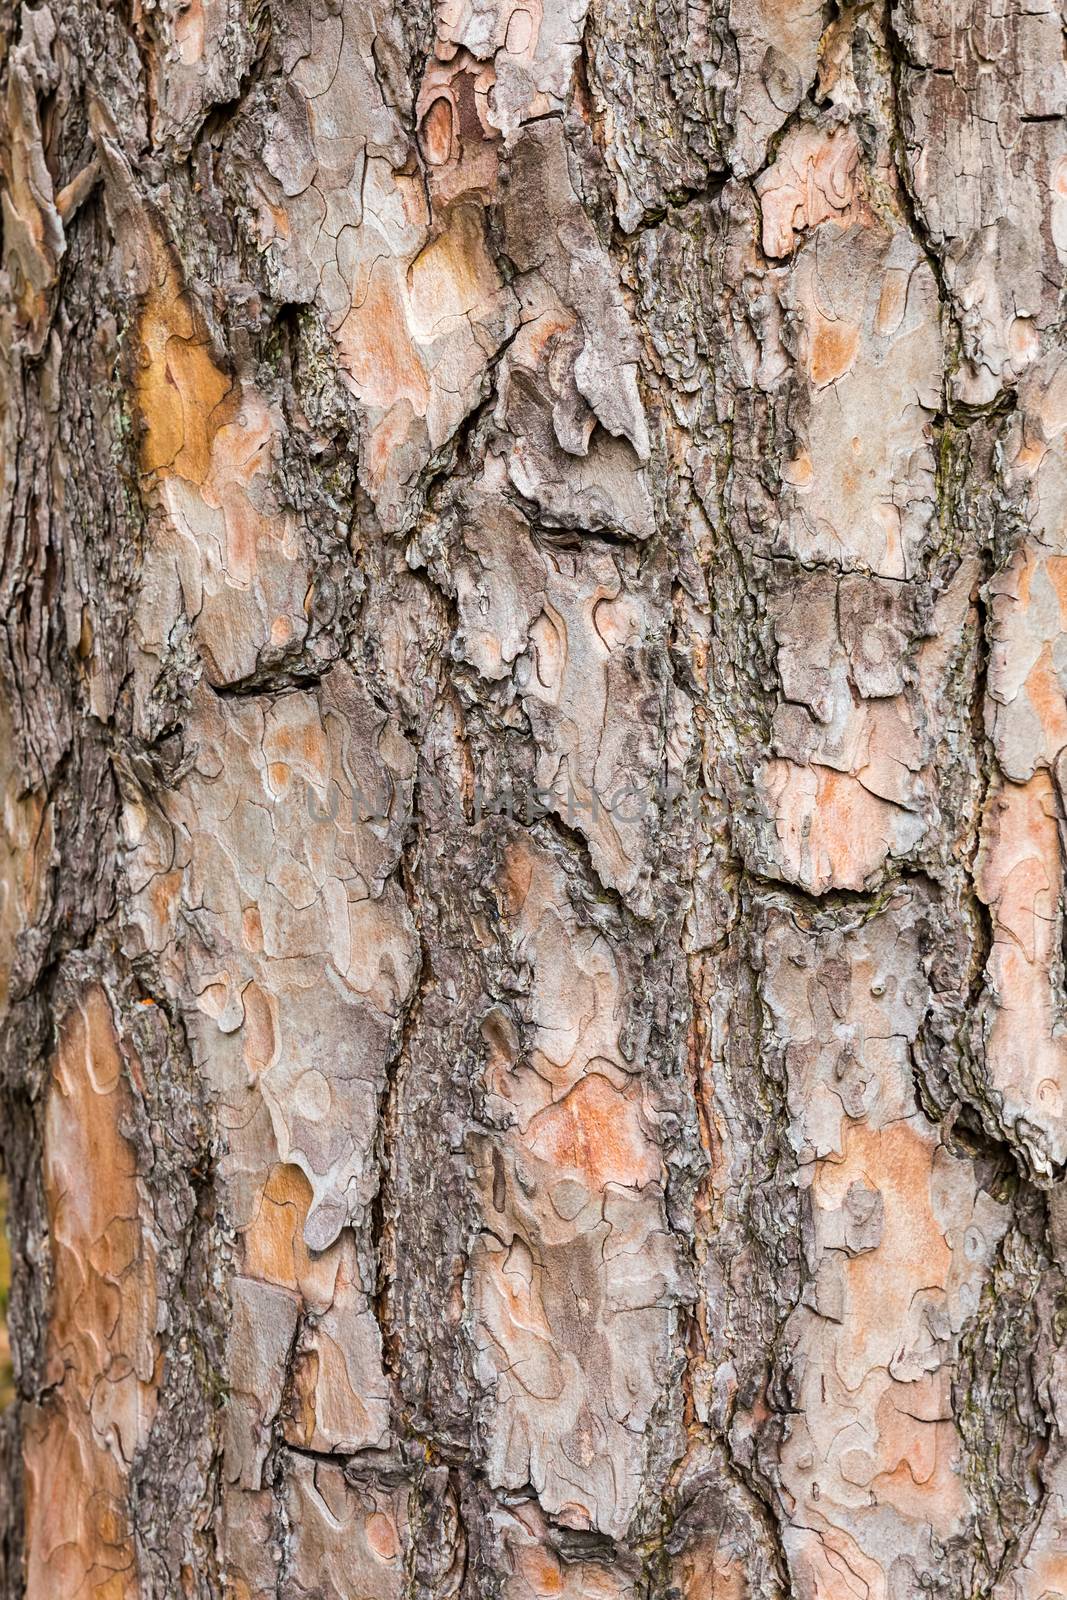 Bark of Scotch pine tree as background by BenSchonewille